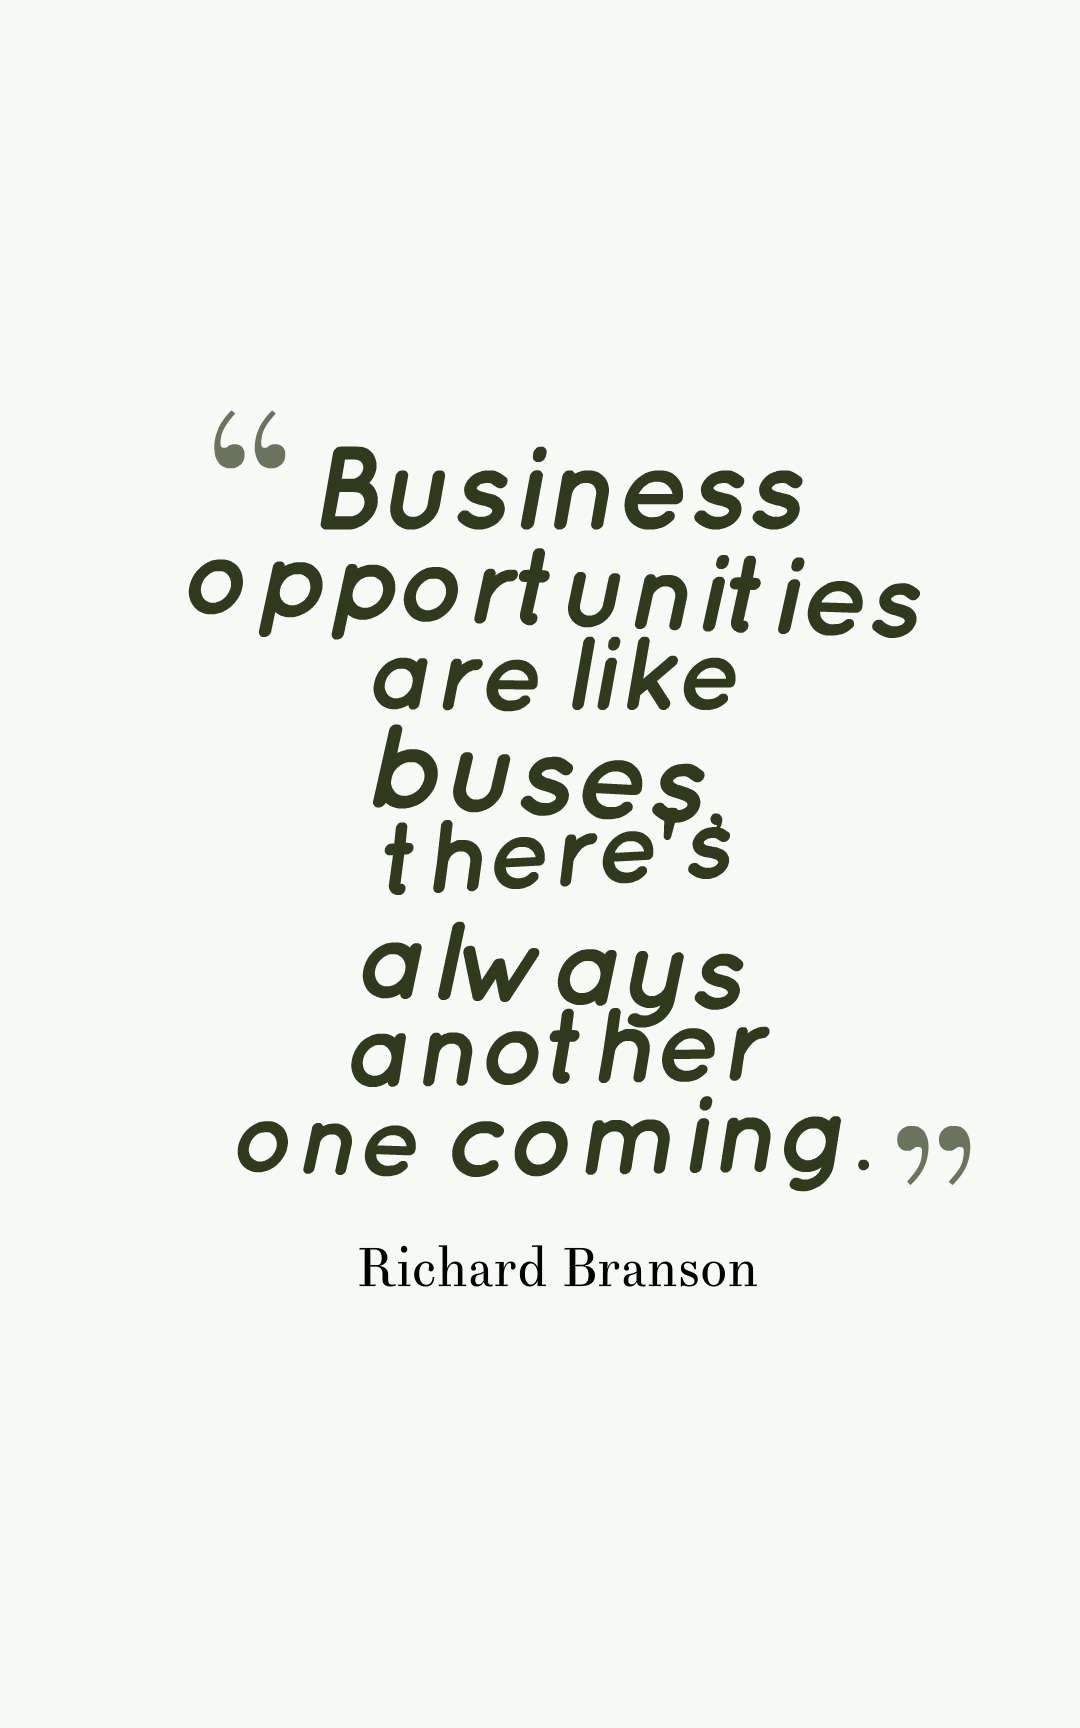 Business opportunities are like buses, there's always another one coming.